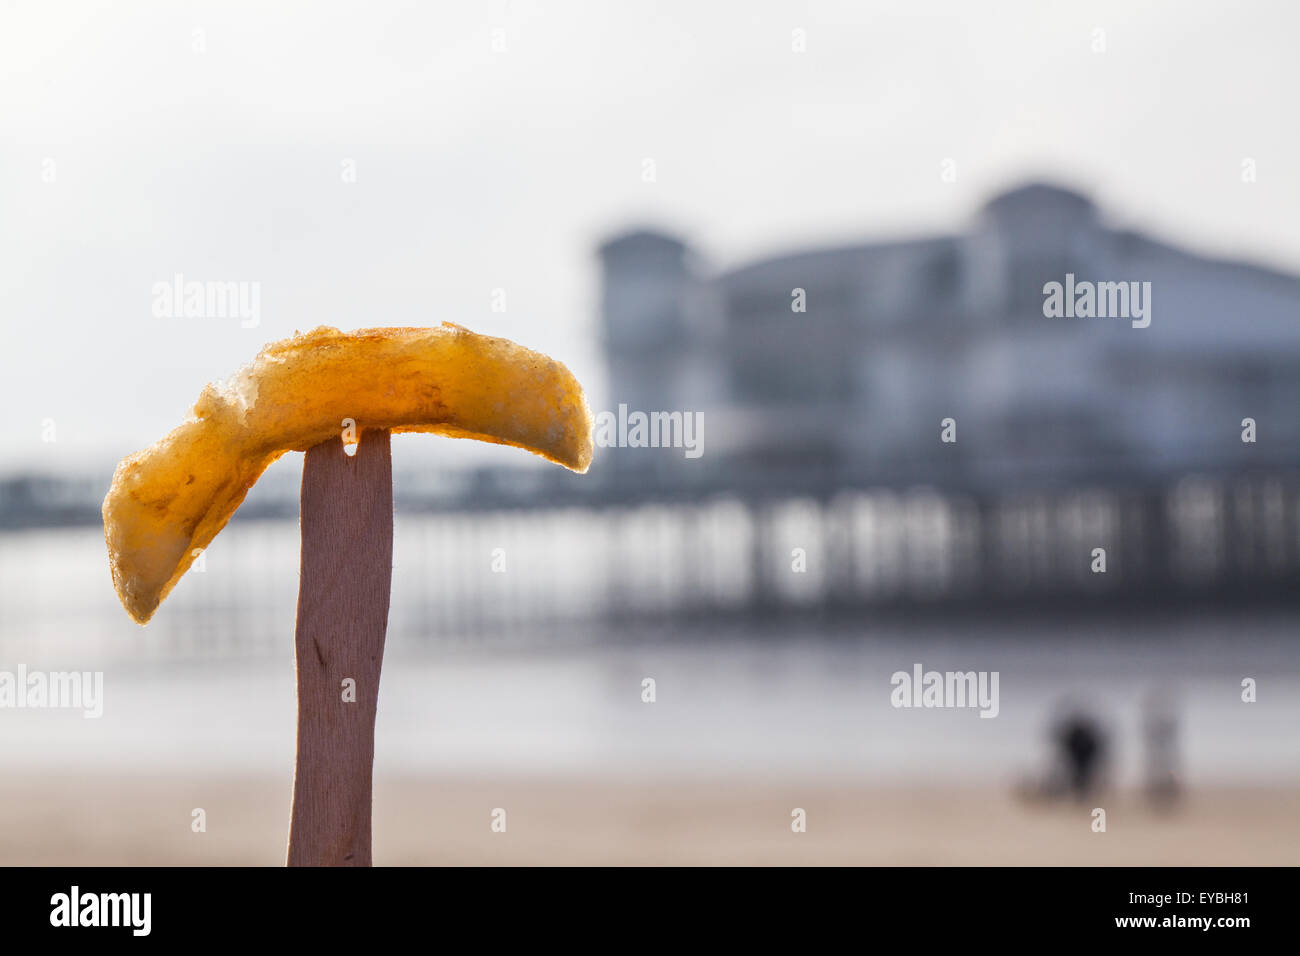 A freshly fried British chip presented on a traditional wood chip shop fork at the seaside with a blurred pier in the background Stock Photo